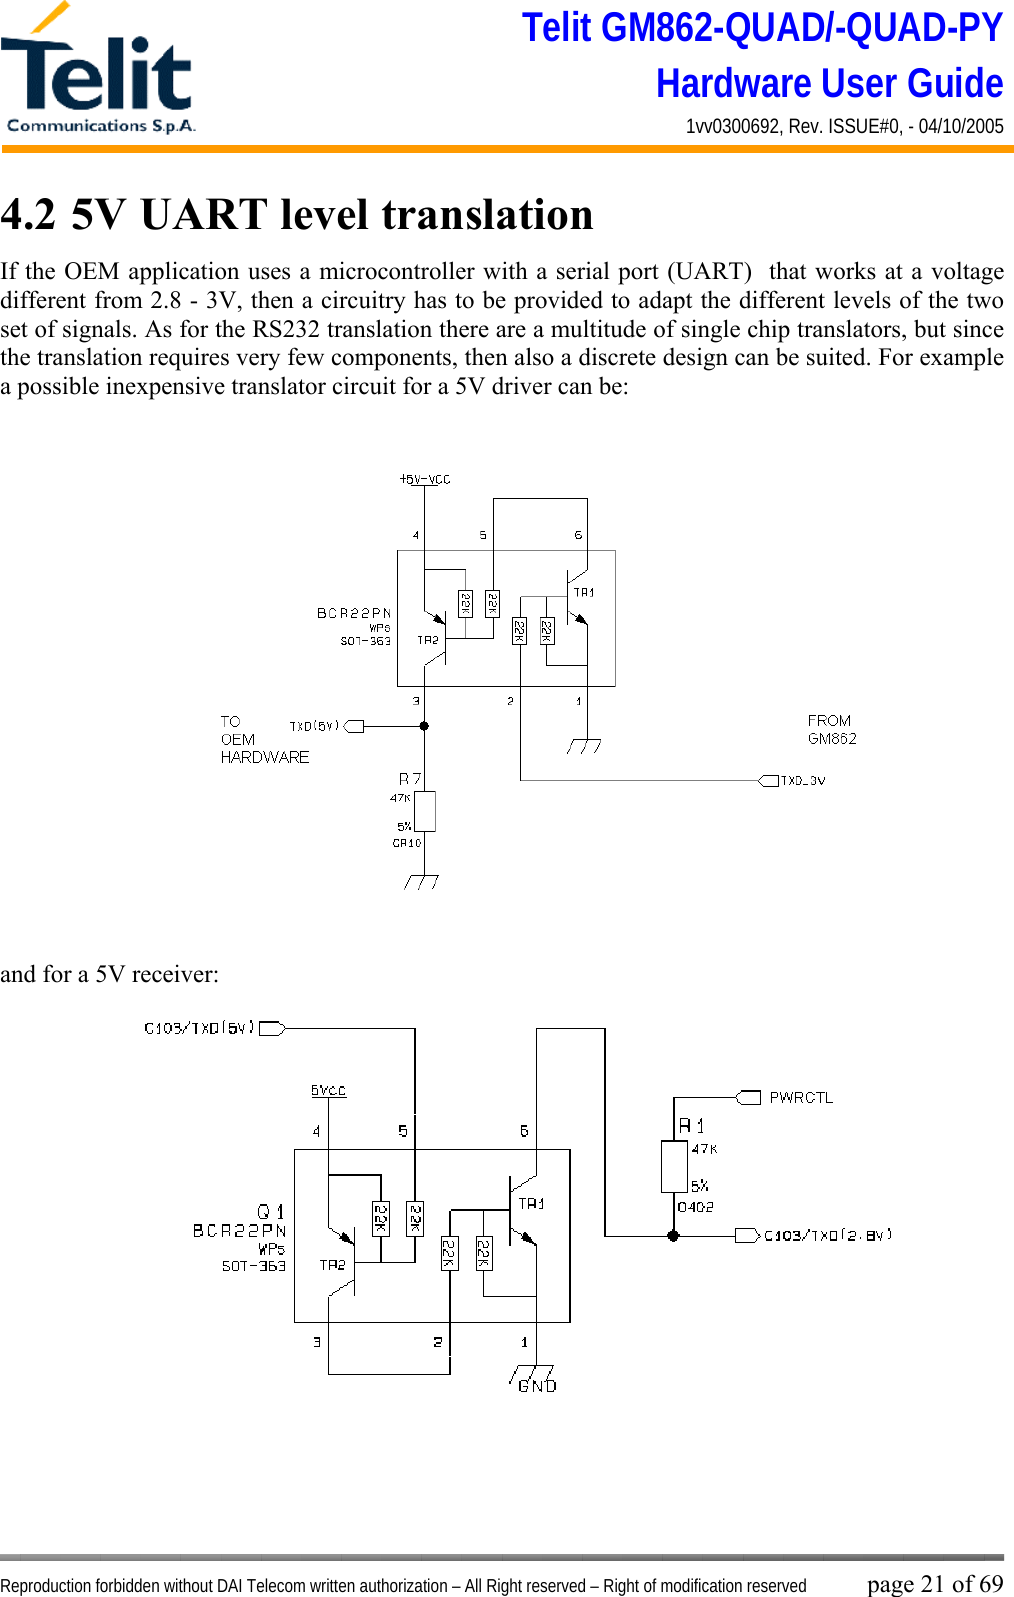 Telit GM862-QUAD/-QUAD-PY Hardware User Guide 1vv0300692, Rev. ISSUE#0, - 04/10/2005   Reproduction forbidden without DAI Telecom written authorization – All Right reserved – Right of modification reserved page 21 of 69 4.2  5V UART level translation If the OEM application uses a microcontroller with a serial port (UART)  that works at a voltage different from 2.8 - 3V, then a circuitry has to be provided to adapt the different levels of the two set of signals. As for the RS232 translation there are a multitude of single chip translators, but since the translation requires very few components, then also a discrete design can be suited. For example a possible inexpensive translator circuit for a 5V driver can be:   and for a 5V receiver:   